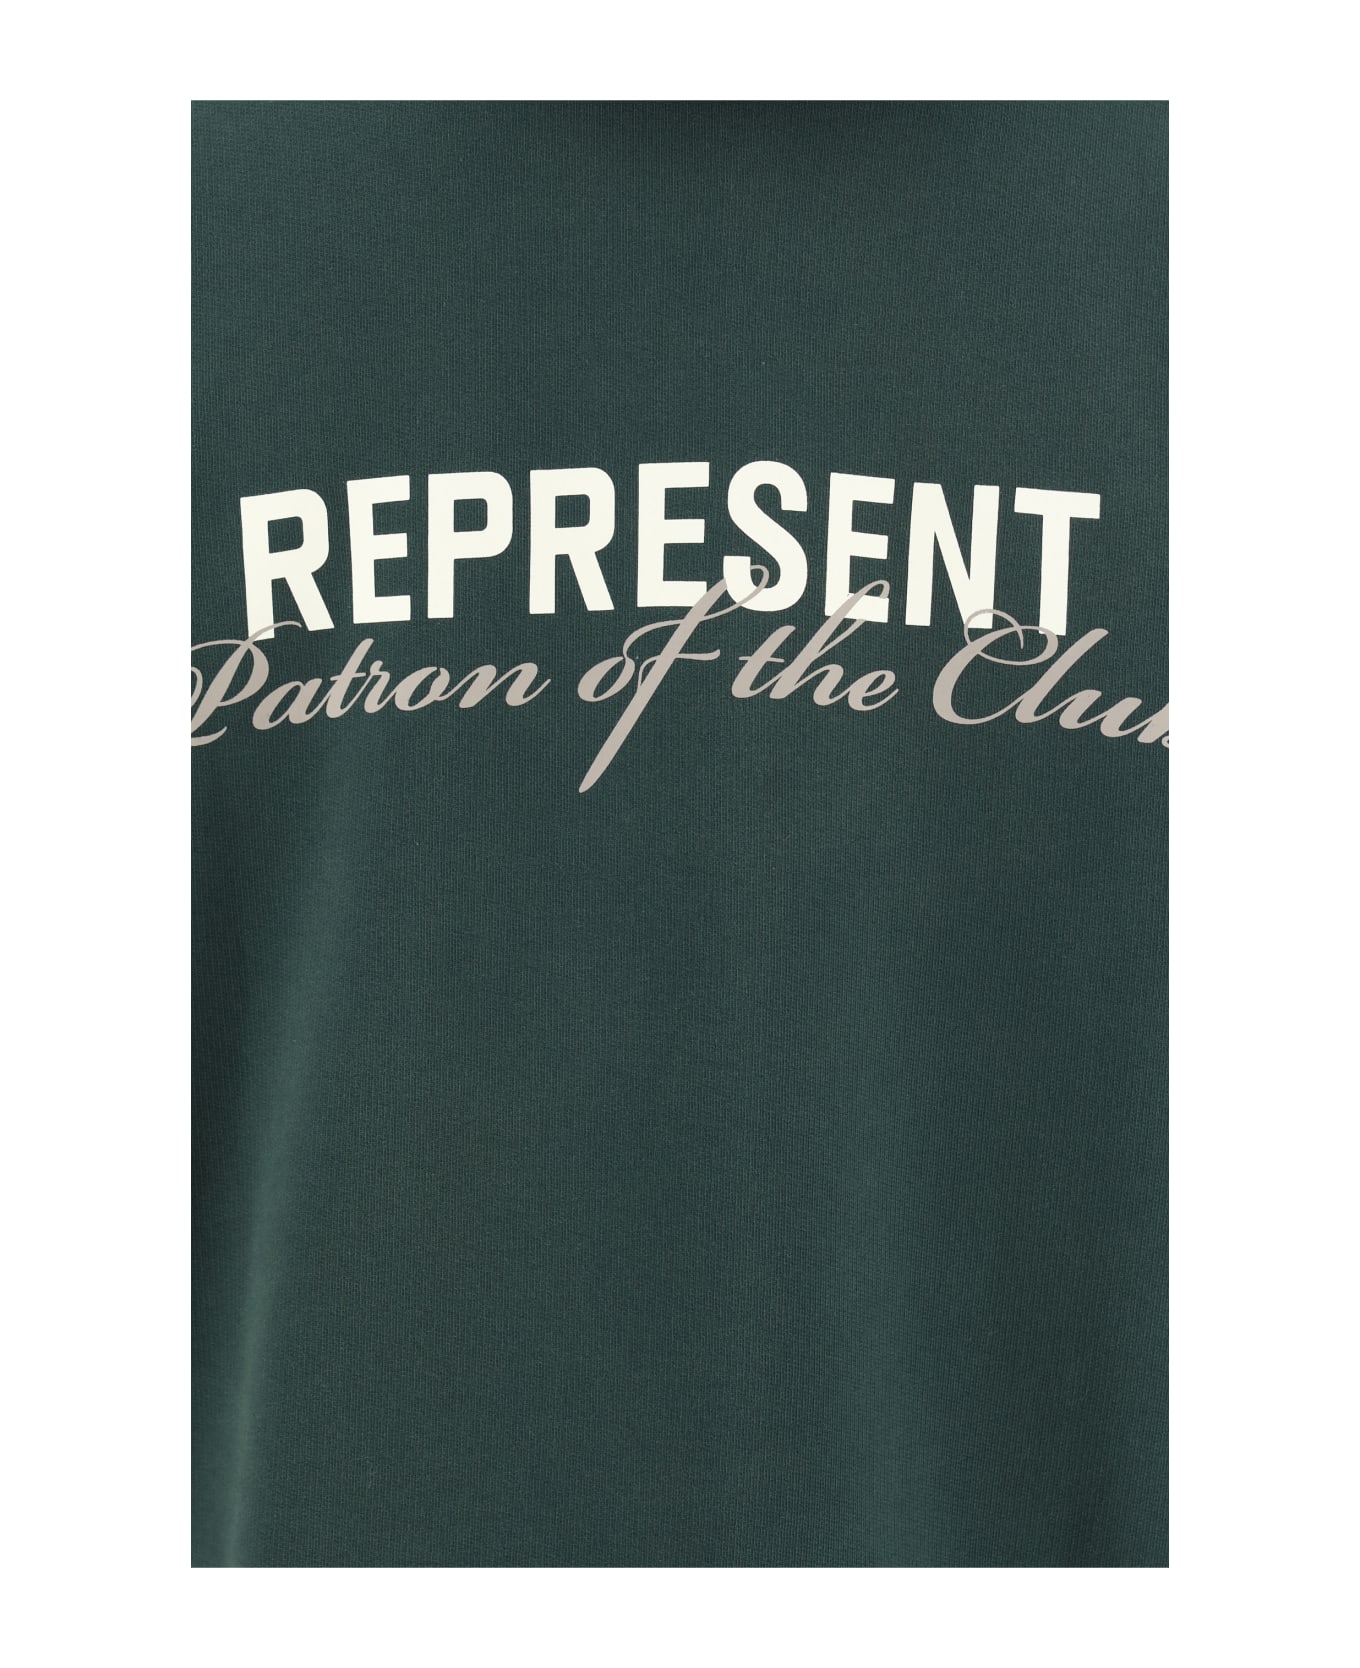 REPRESENT Hoodie - Forest Green